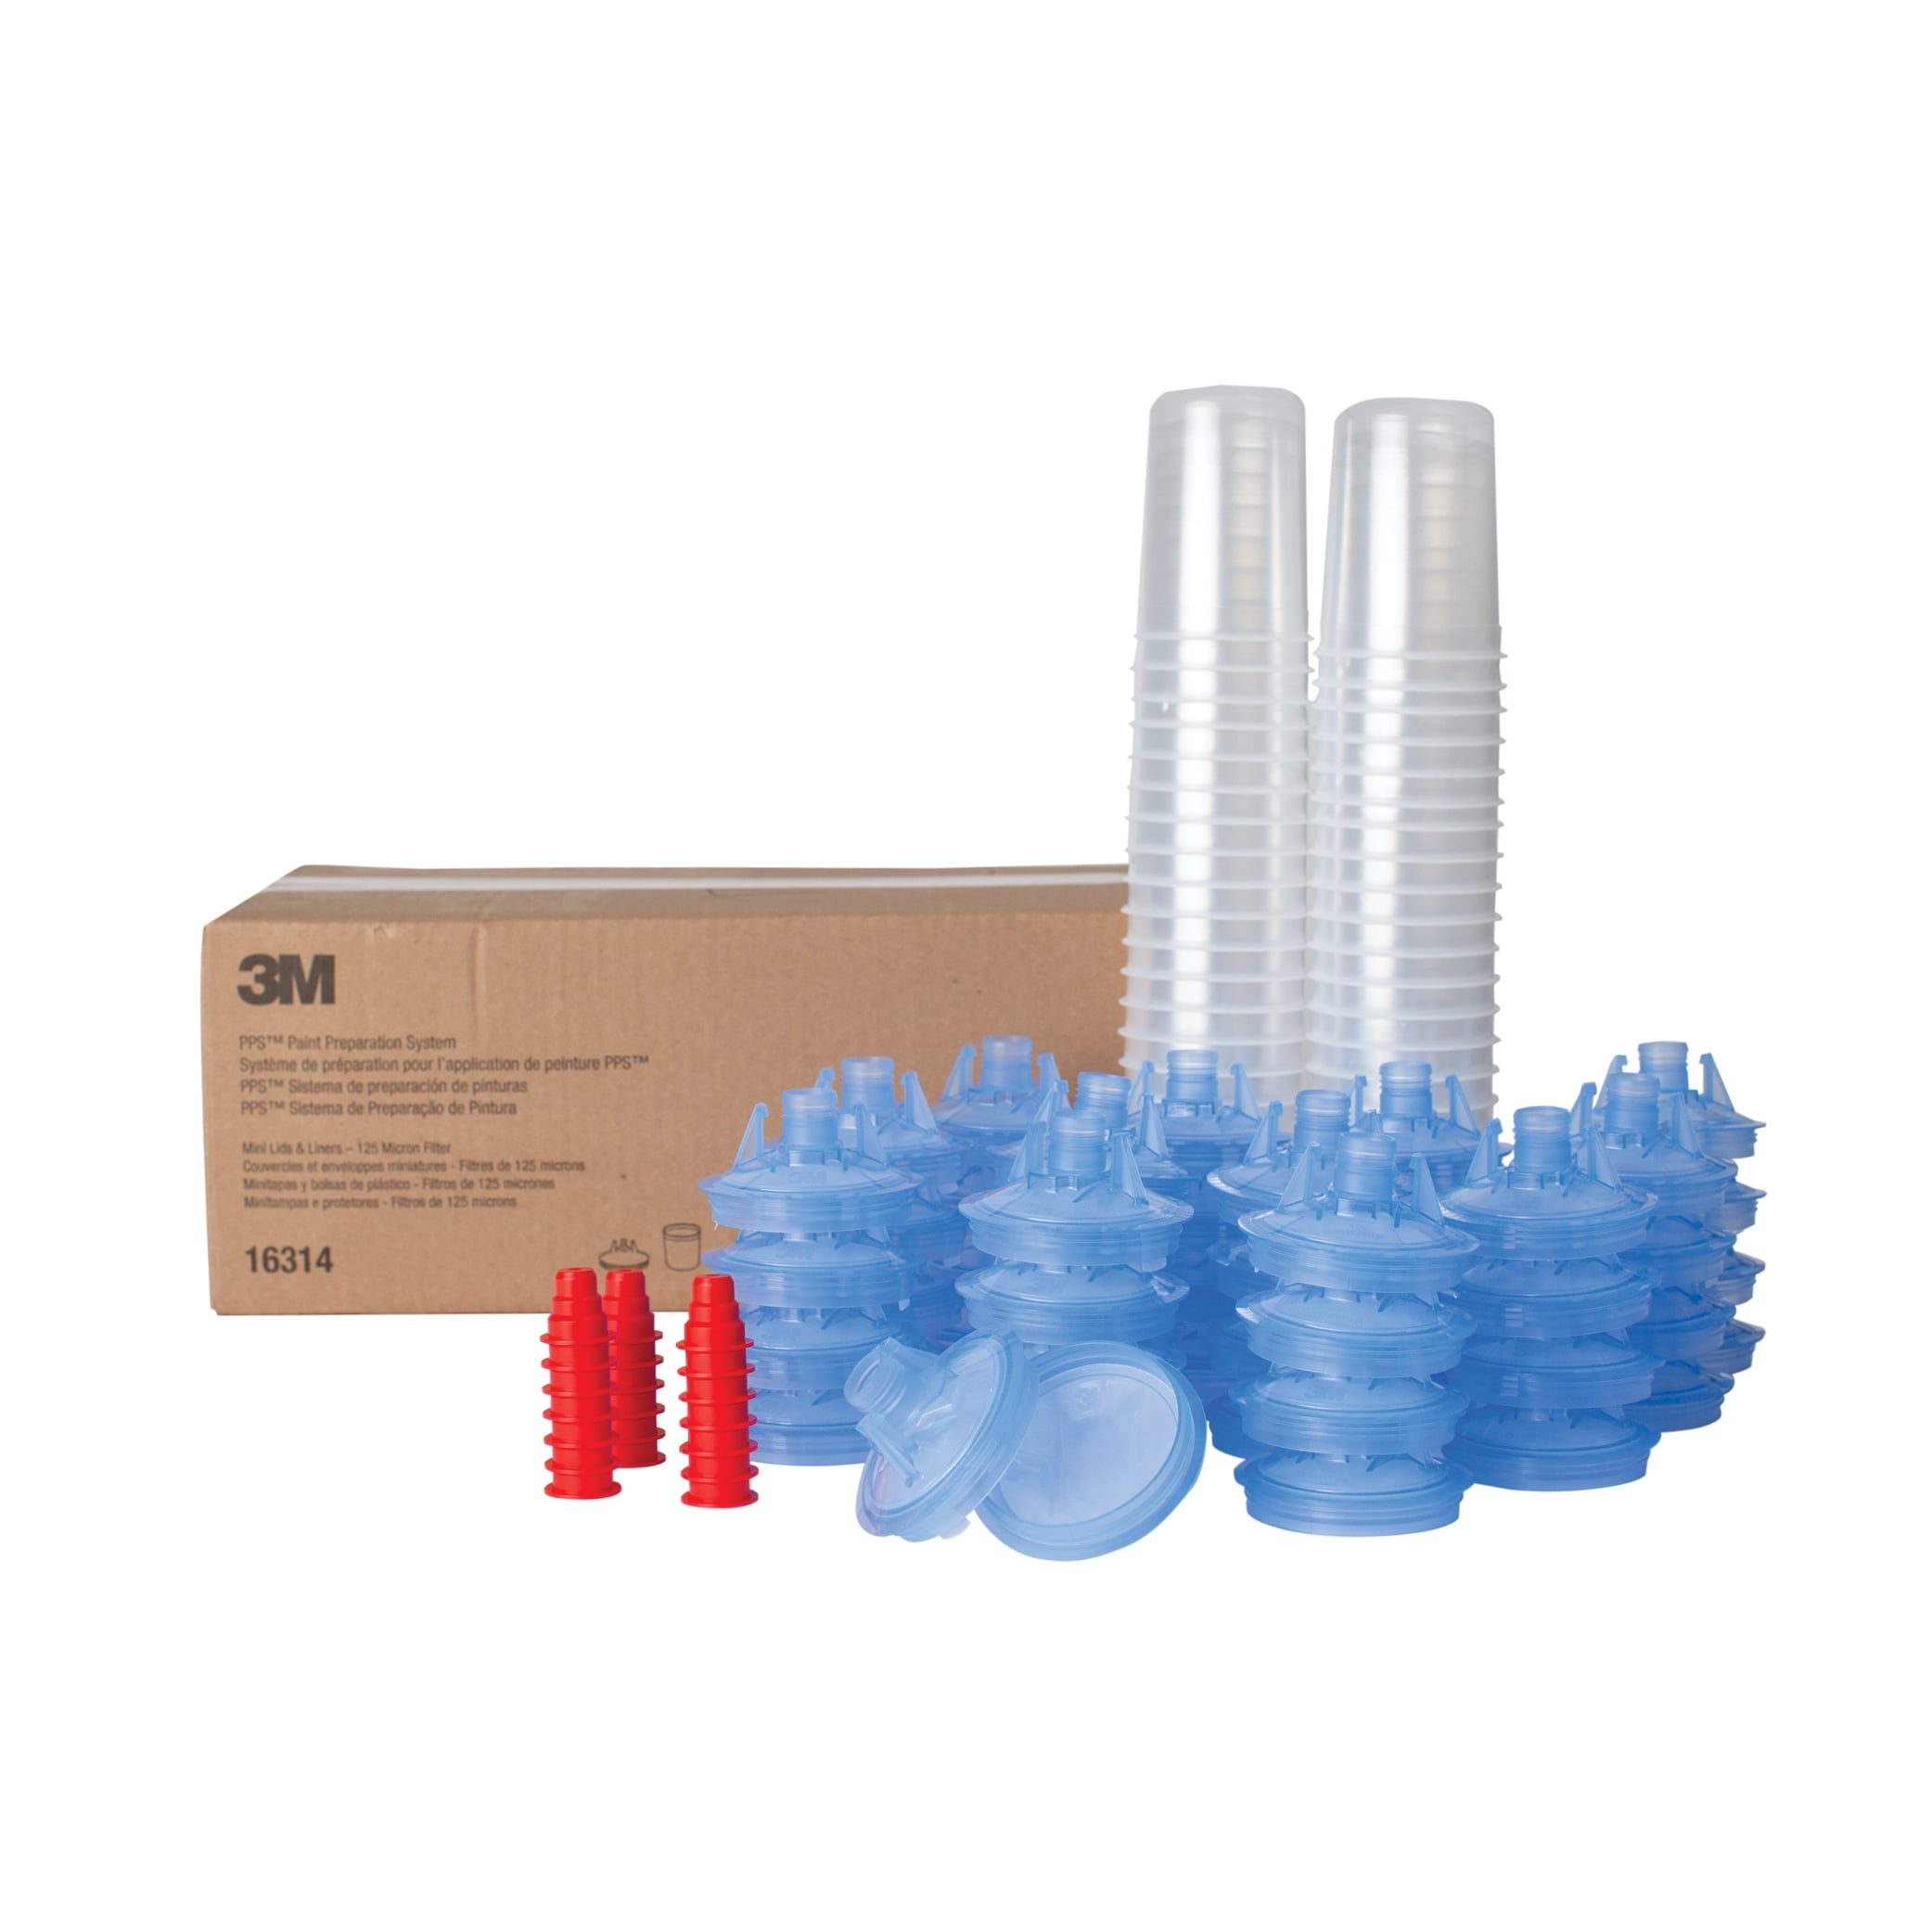 3M PPS Small Lids and Liners Kit